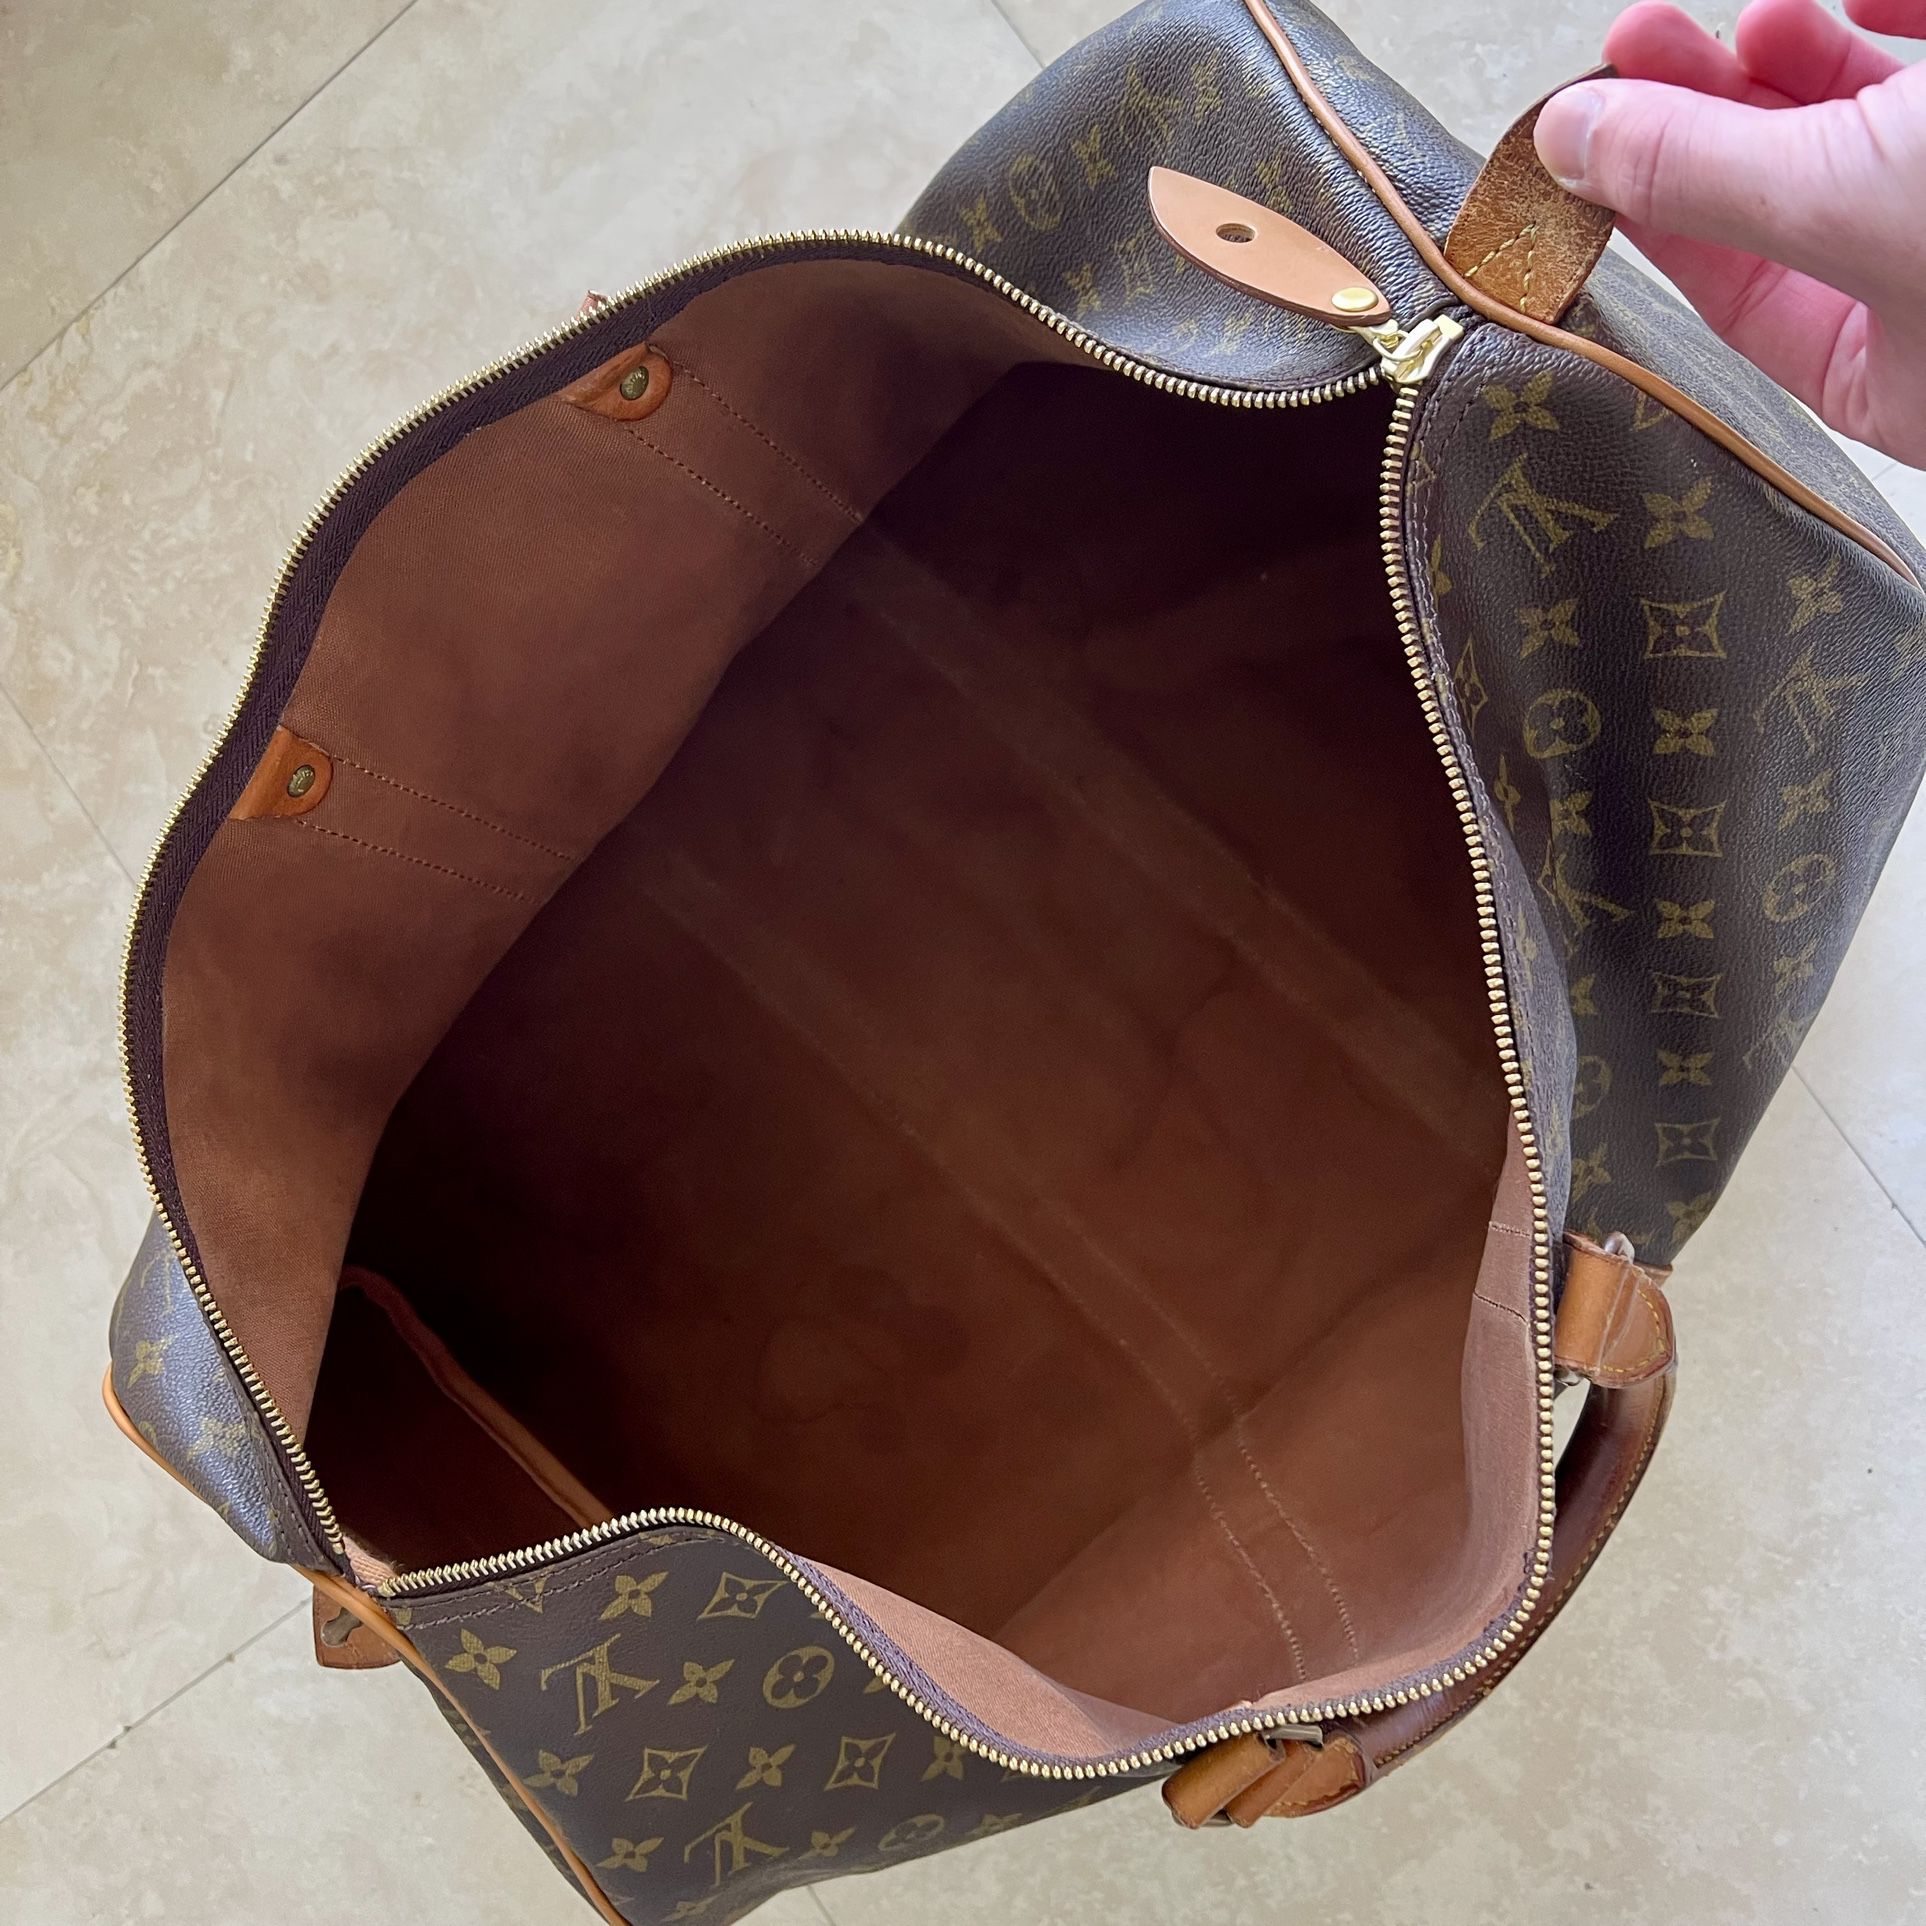 Louis Vuitton Keepall 55 Travel Bag - VINTAGE for Sale in Boca